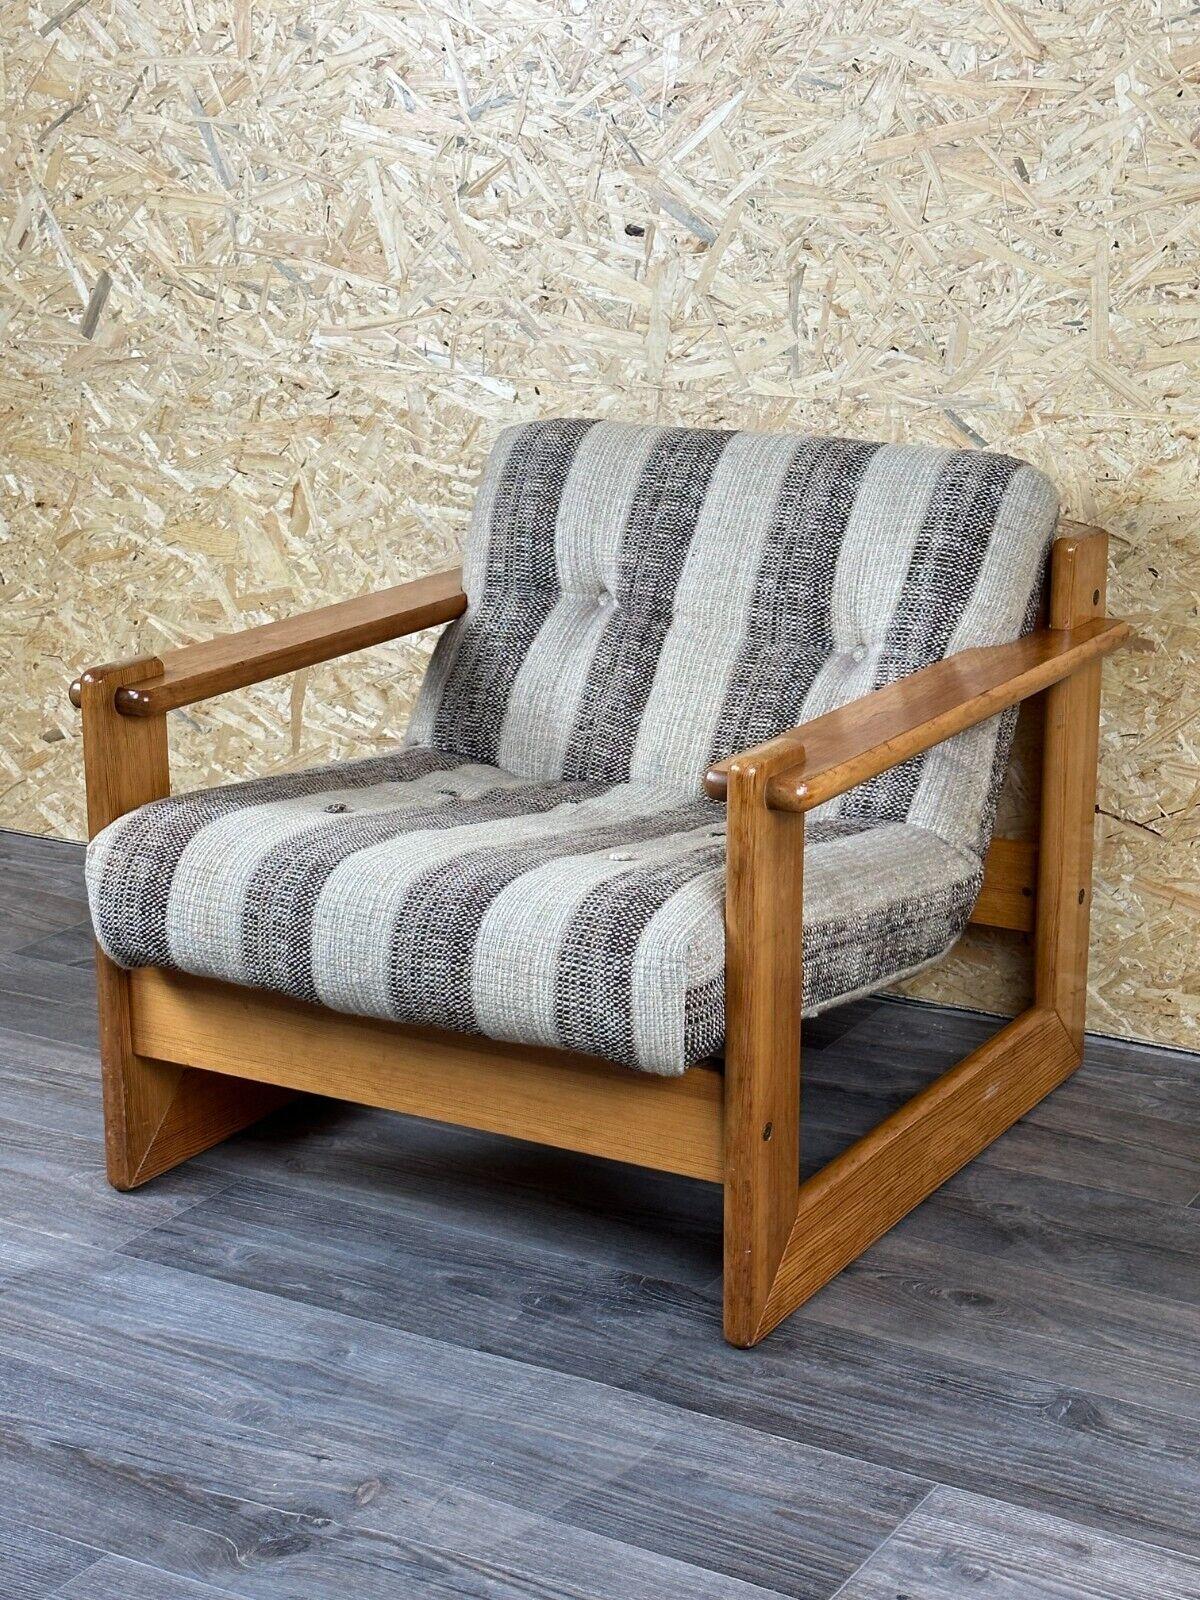 60s 70s Pine Easy Chair Lounge Chair Danish Modern Design In Good Condition For Sale In Neuenkirchen, NI